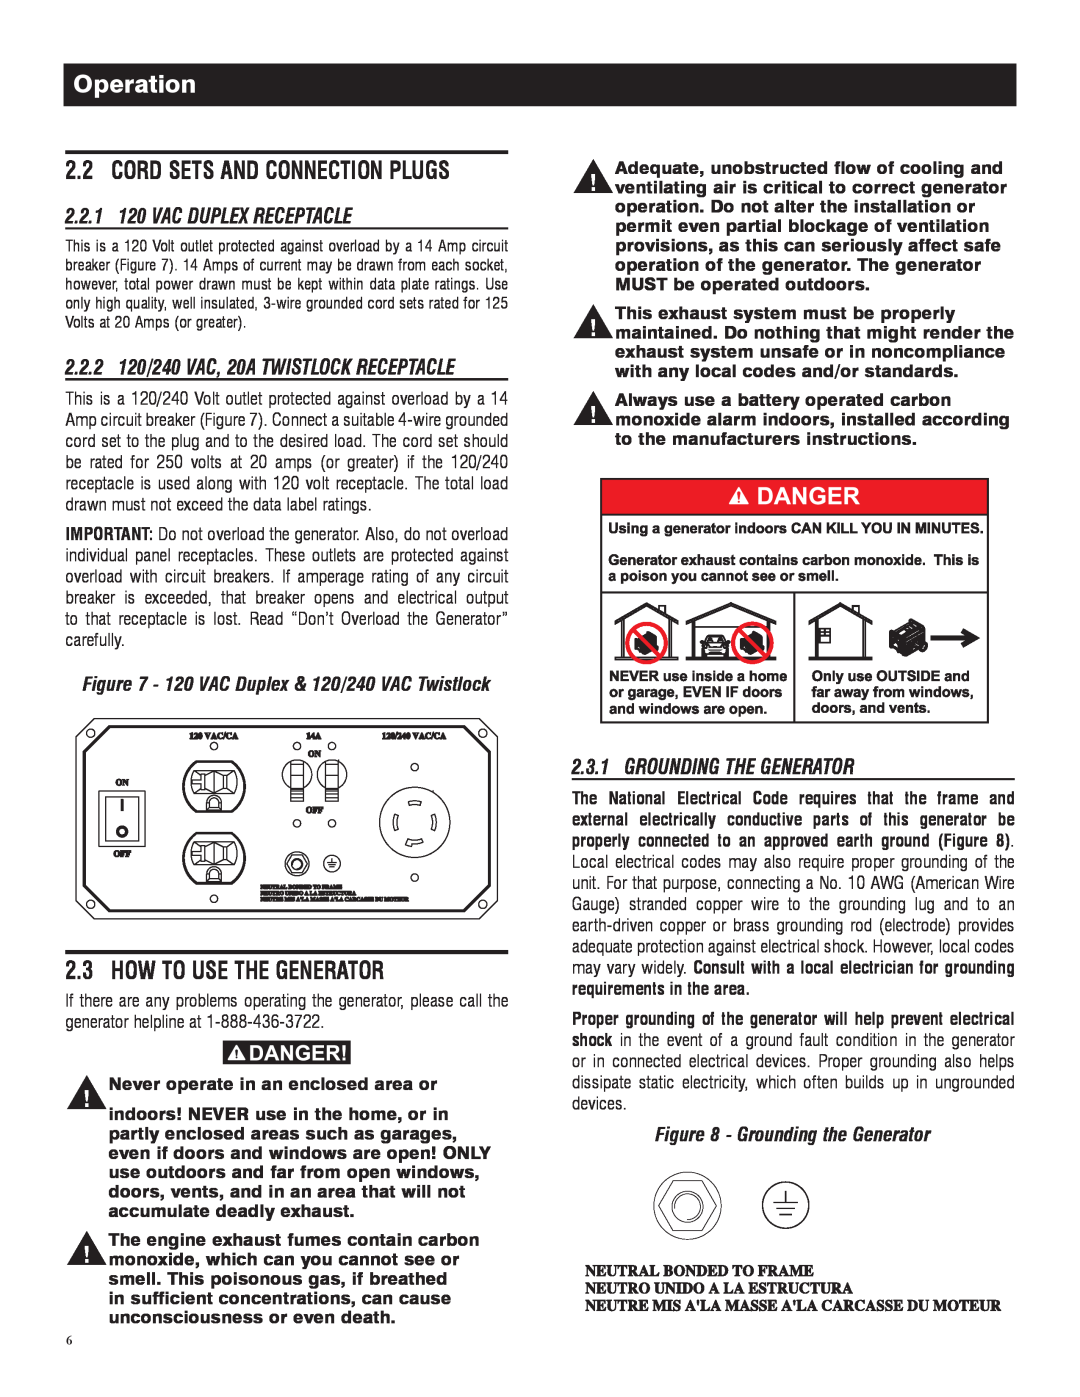 Generac 005982-0 How To Use The Generator, Cord Sets And Connection Plugs, 2.2.1 120 VAC DUPLEX RECEPTACLE, Operation 